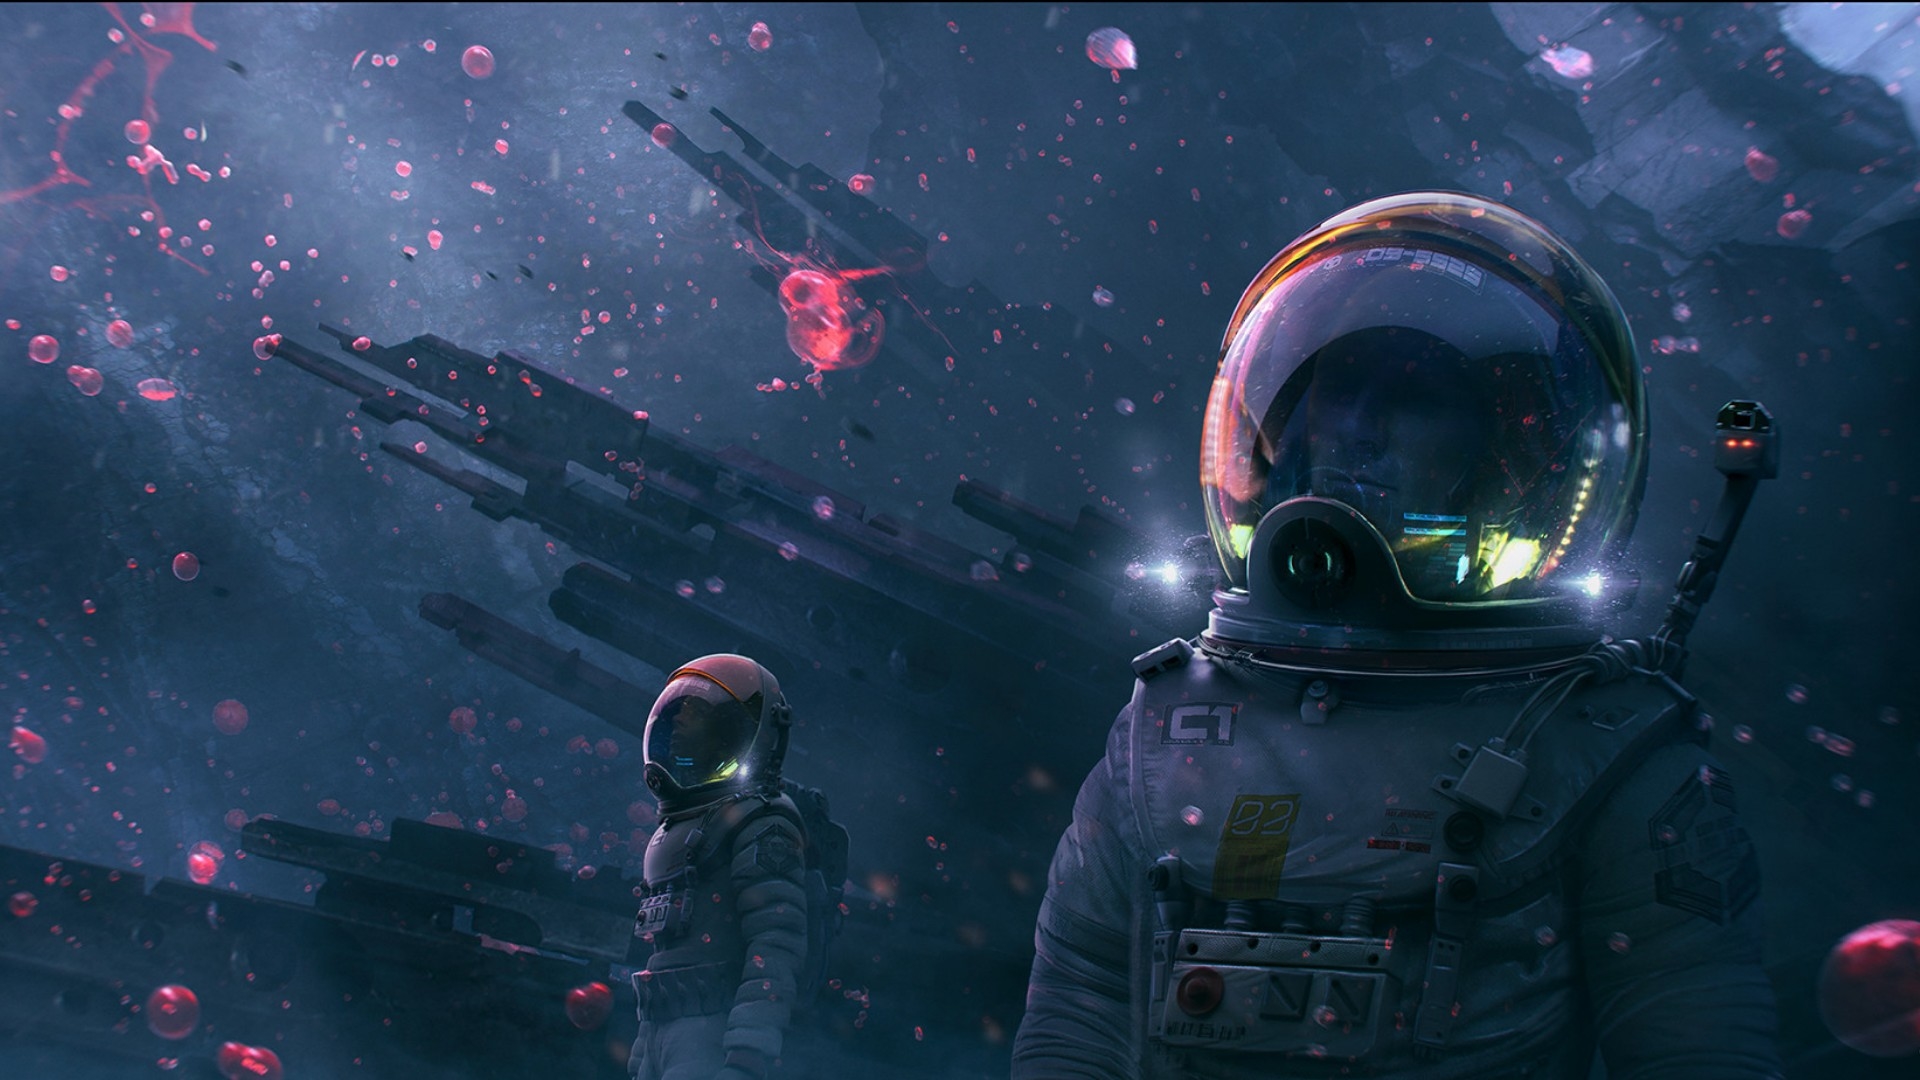 3840x216001945 Two Astronaut In Unknown Planet 3840x216001945